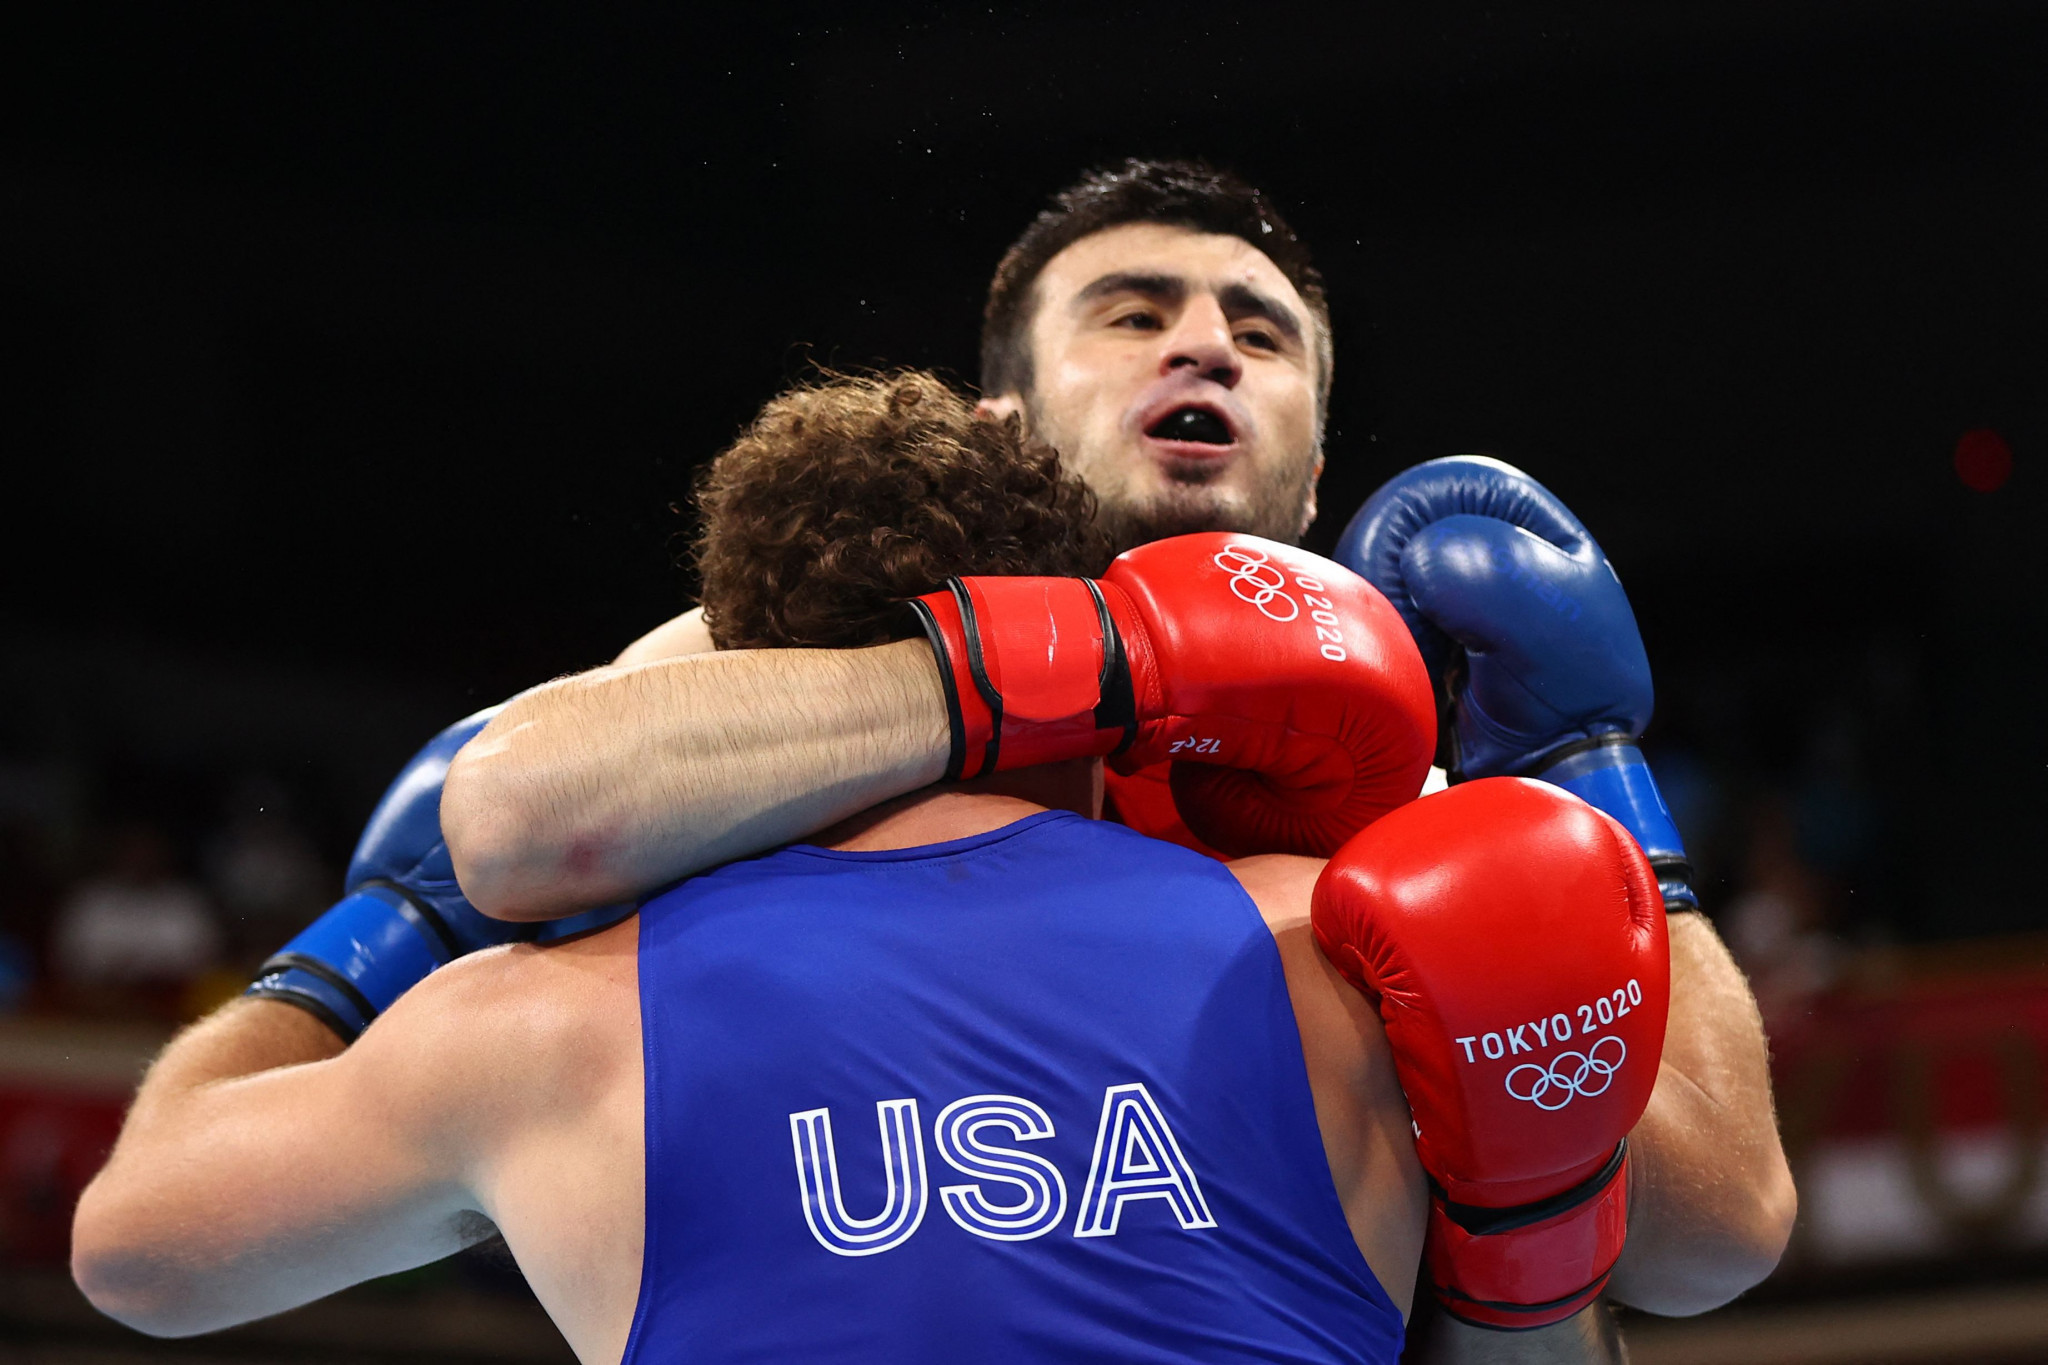 Exclusive: USOPC asked to terminate USA Boxing membership after National Federation quits IBA